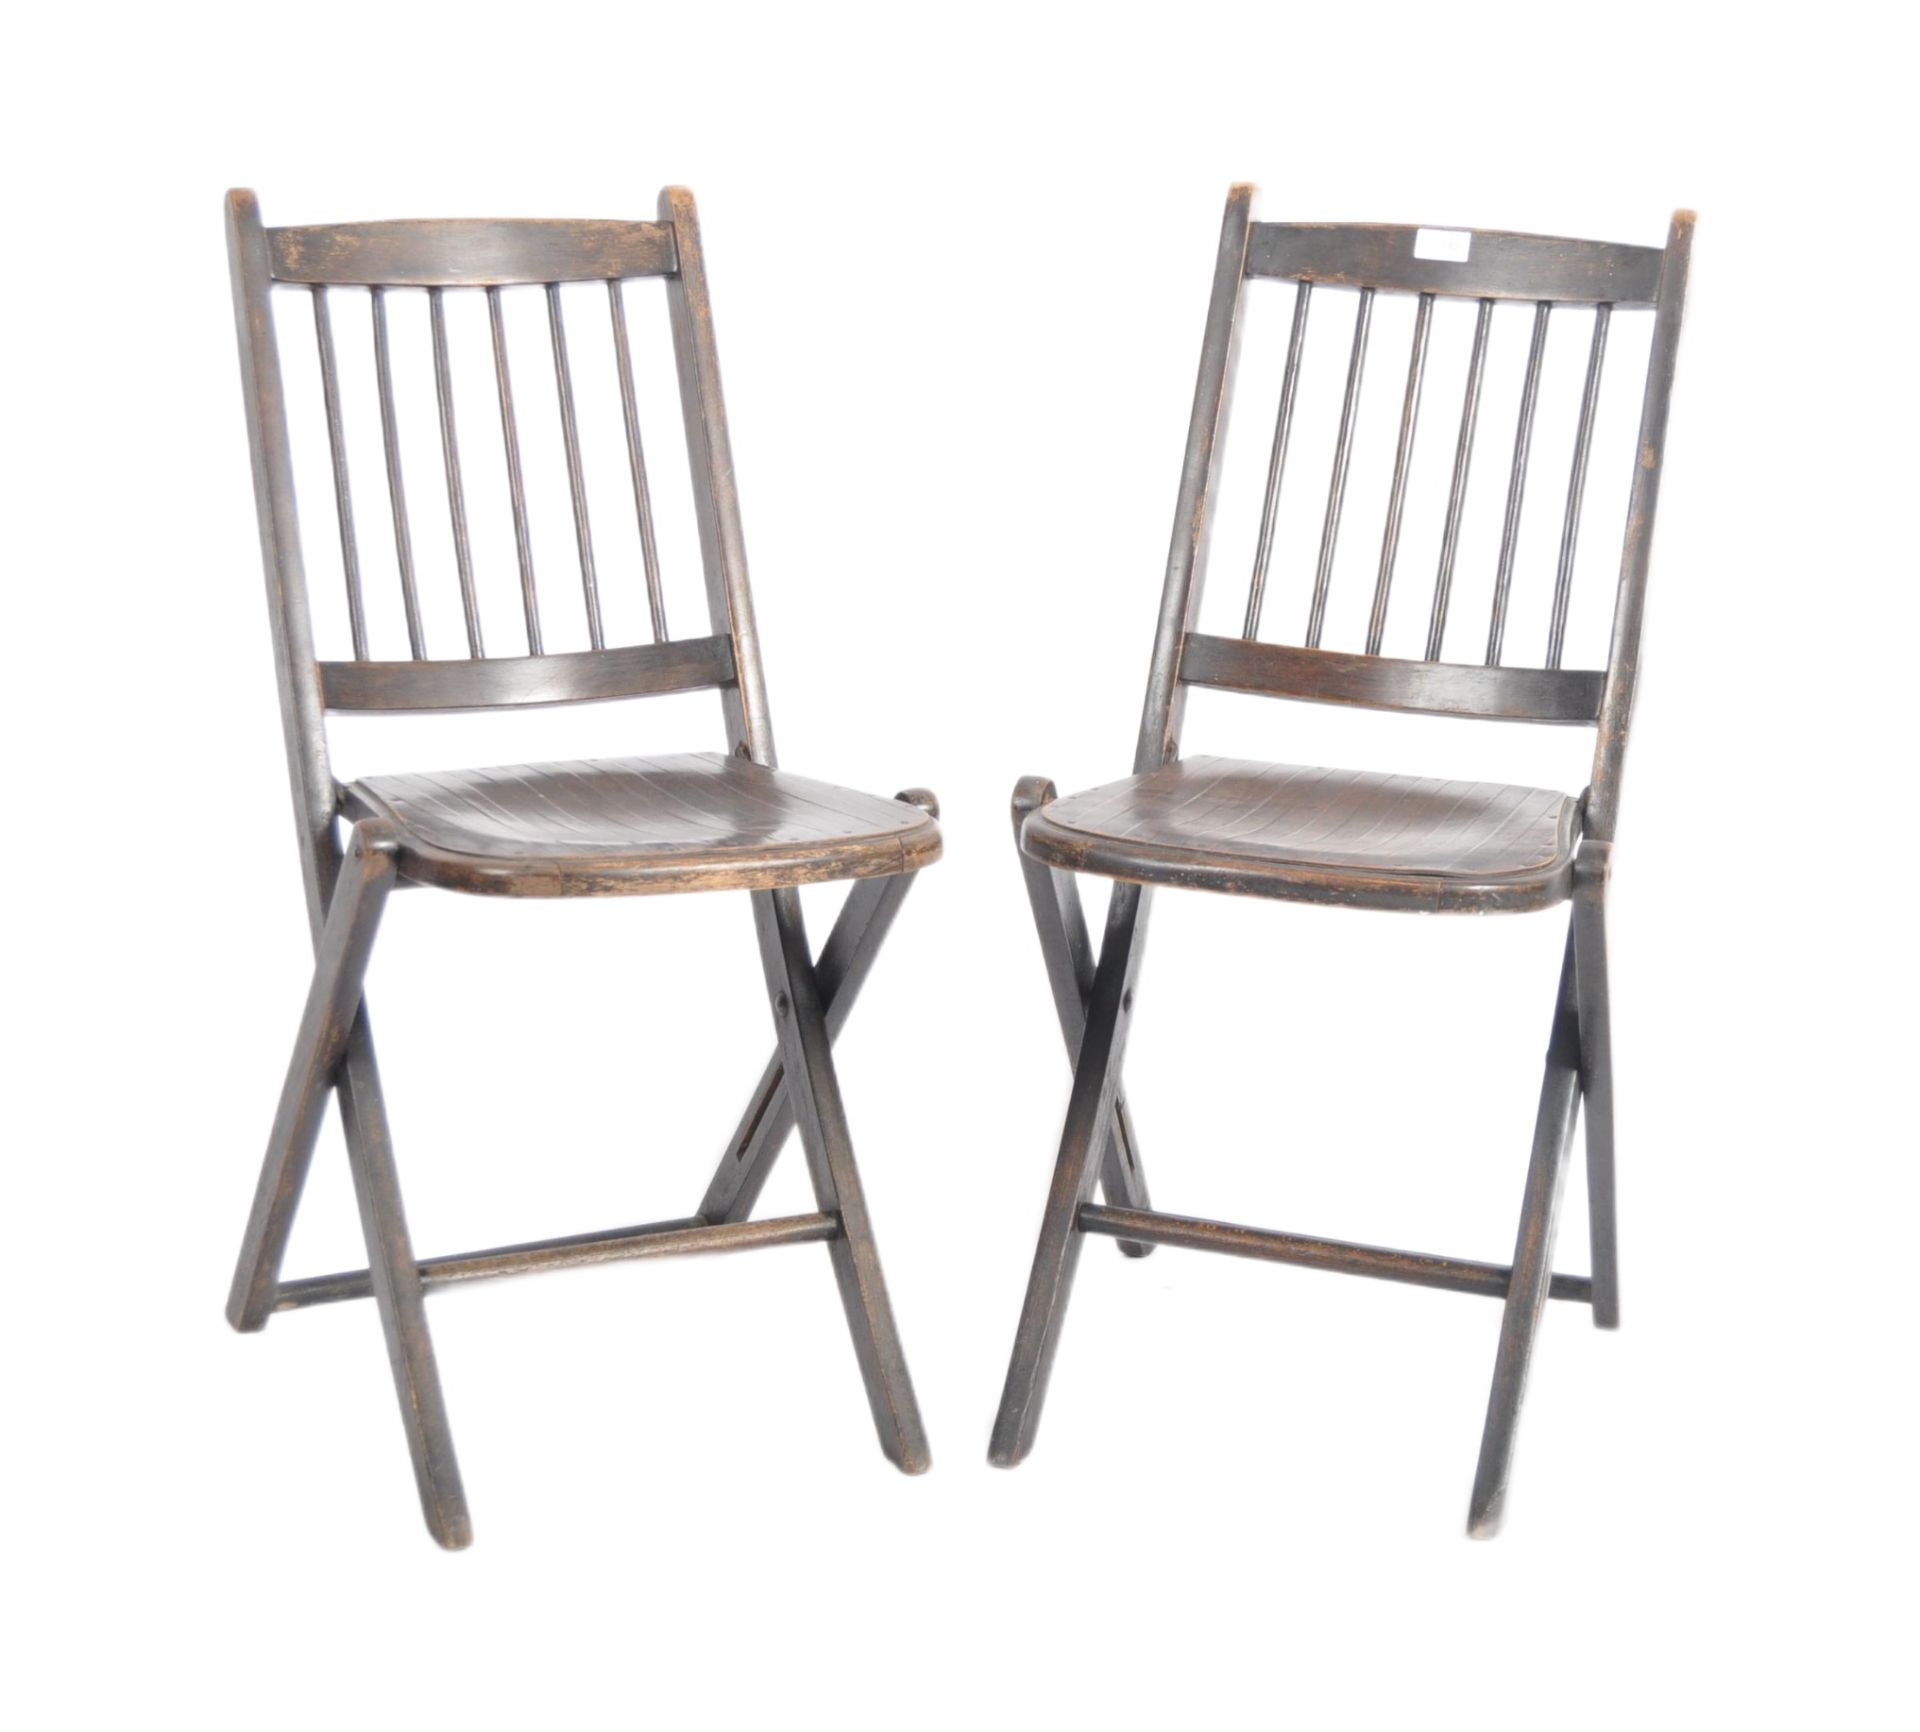 MICHAEL THONET - MATCHING PAIR OF BENTWOOD FOLDING CHAIRS